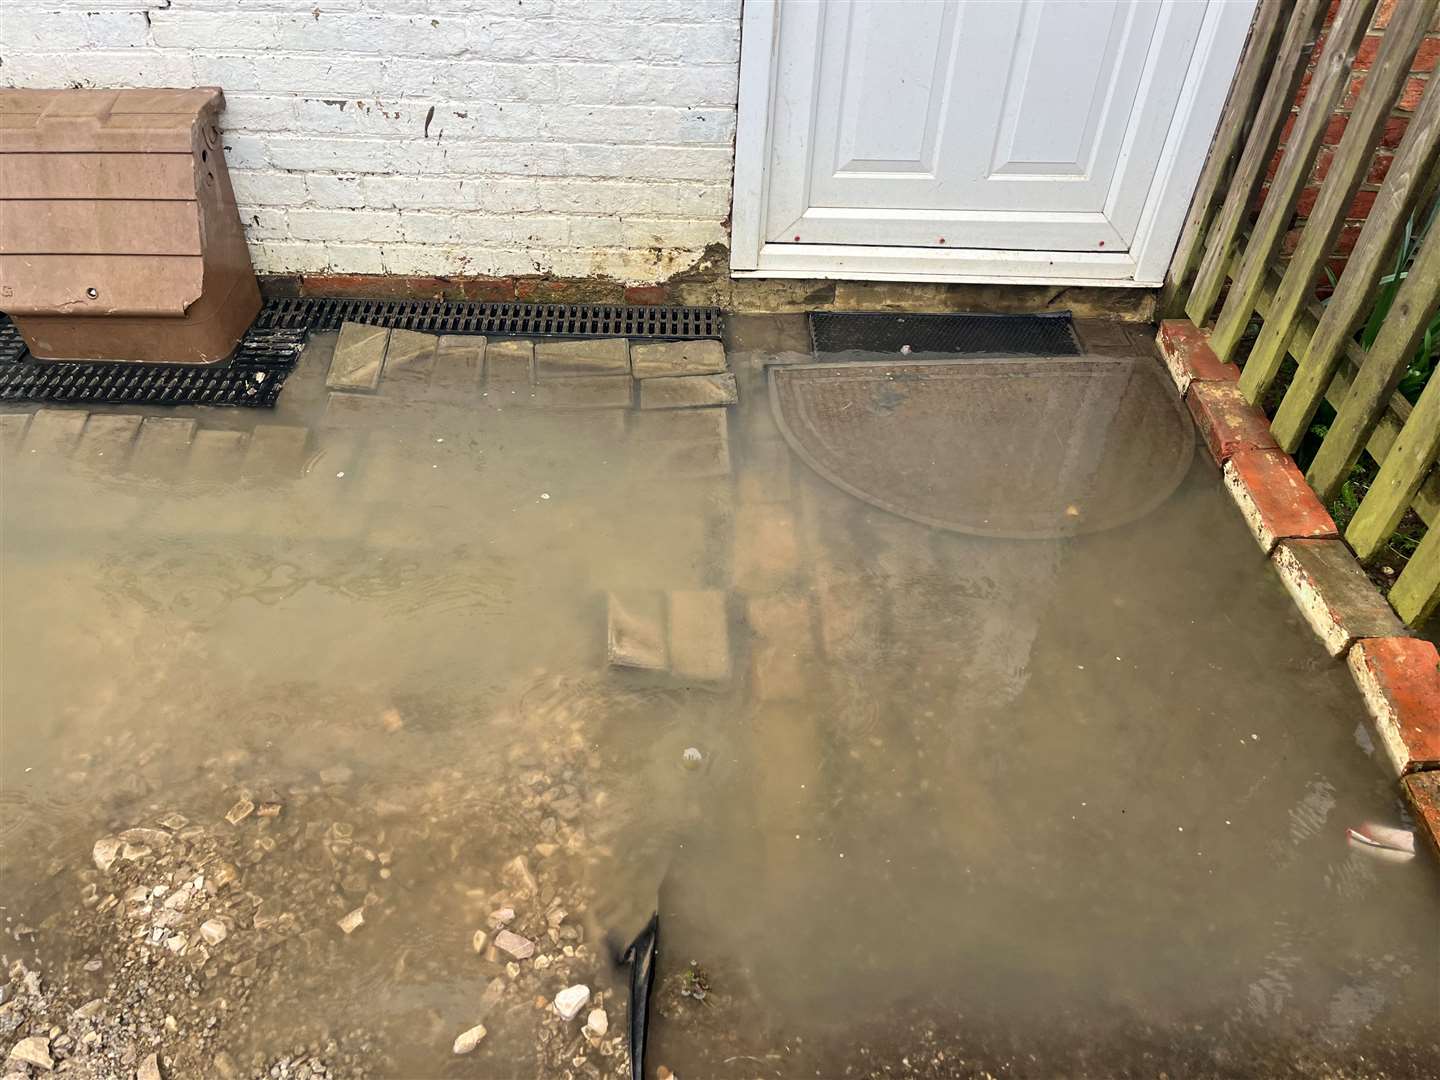 Water is coming up to one resident’s front door, but has not gone into their property